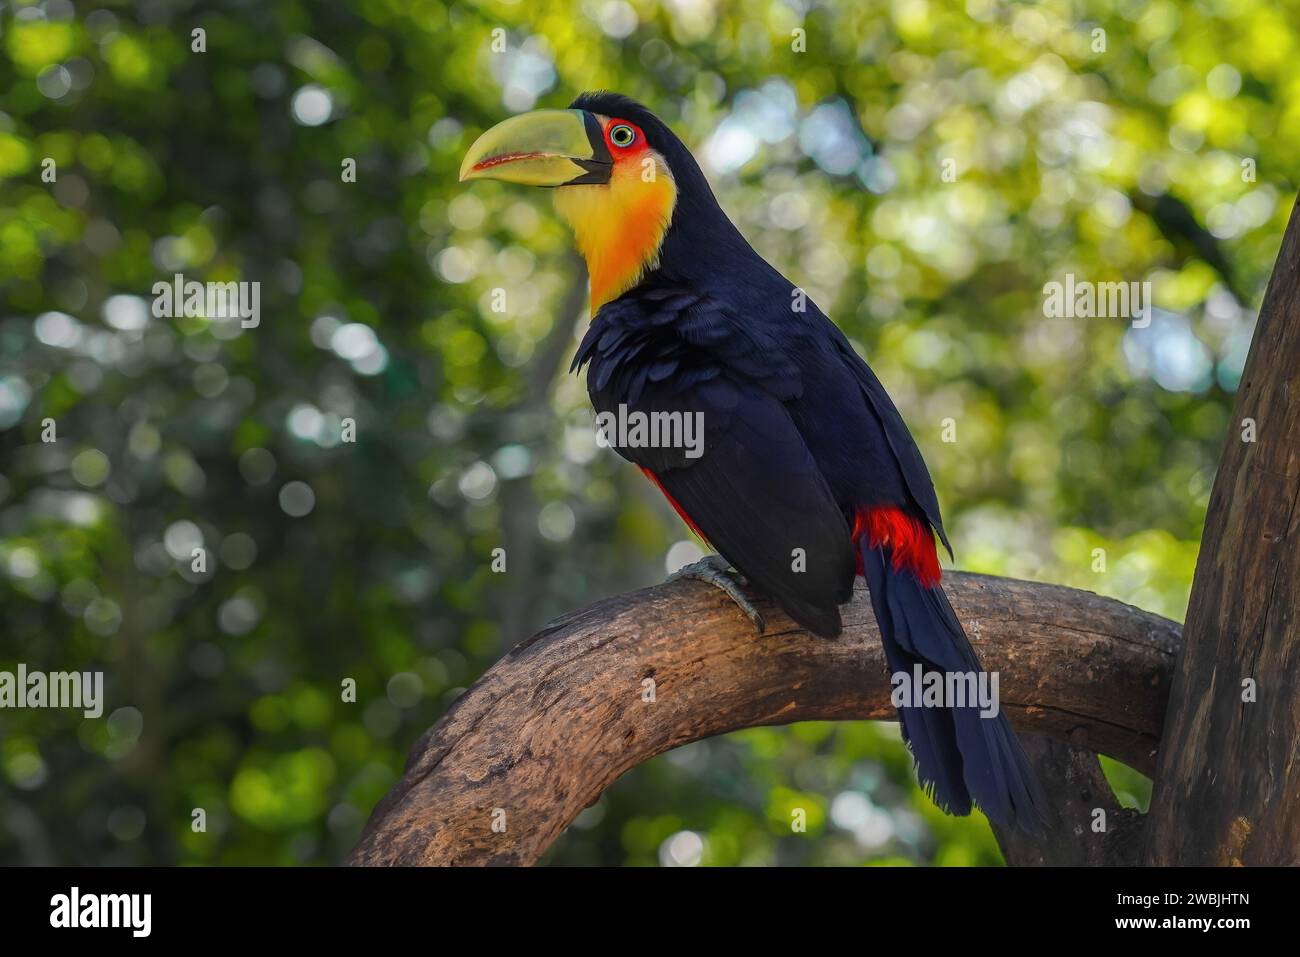 Red-breasted toucan or Green-billed toucan (Ramphastos dicolorus) Stock Photo